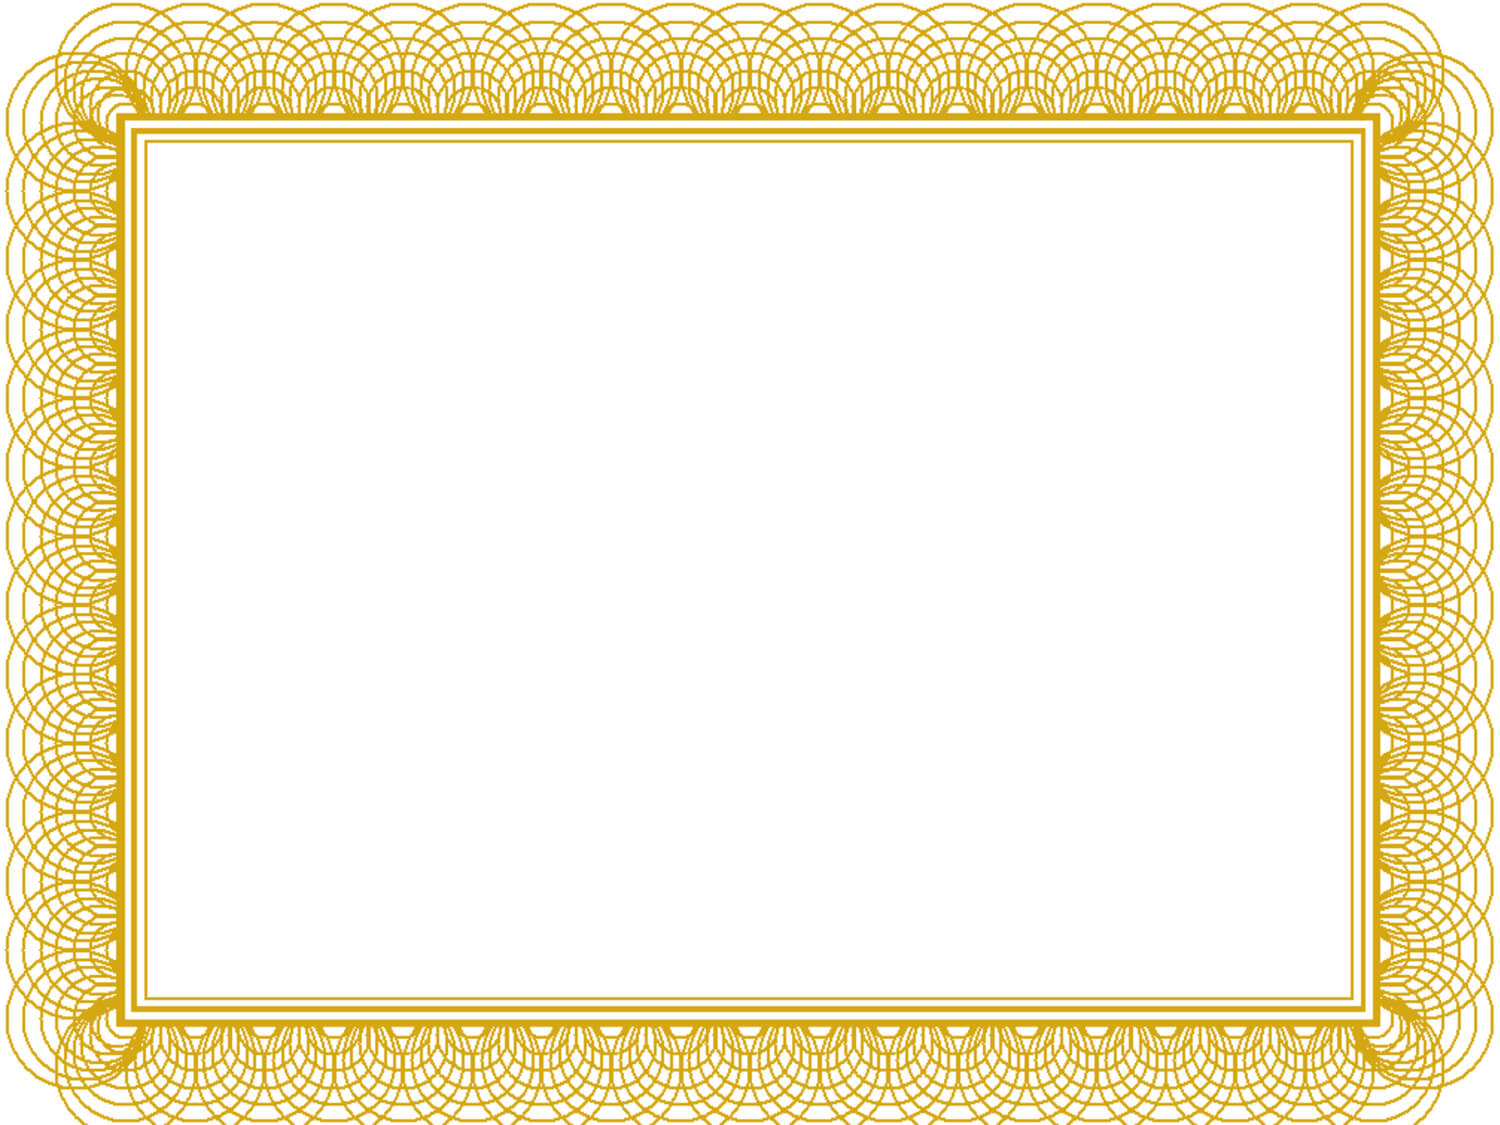 Printable Certificate Borders - Calep.midnightpig.co Within Award Certificate Border Template